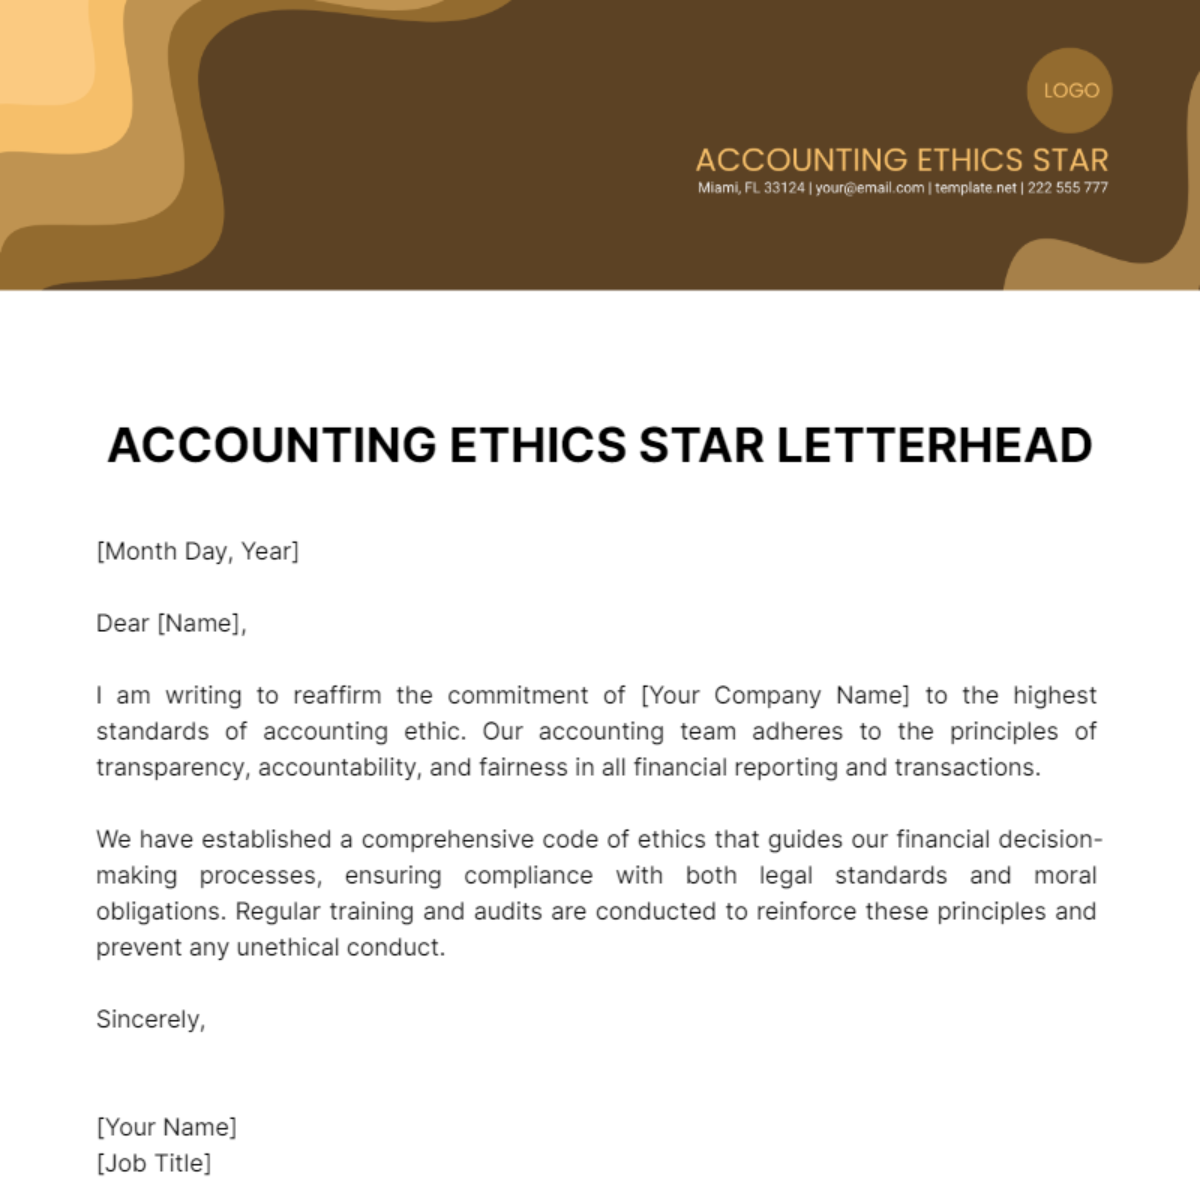 Accounting Ethics Star Letterhead Template